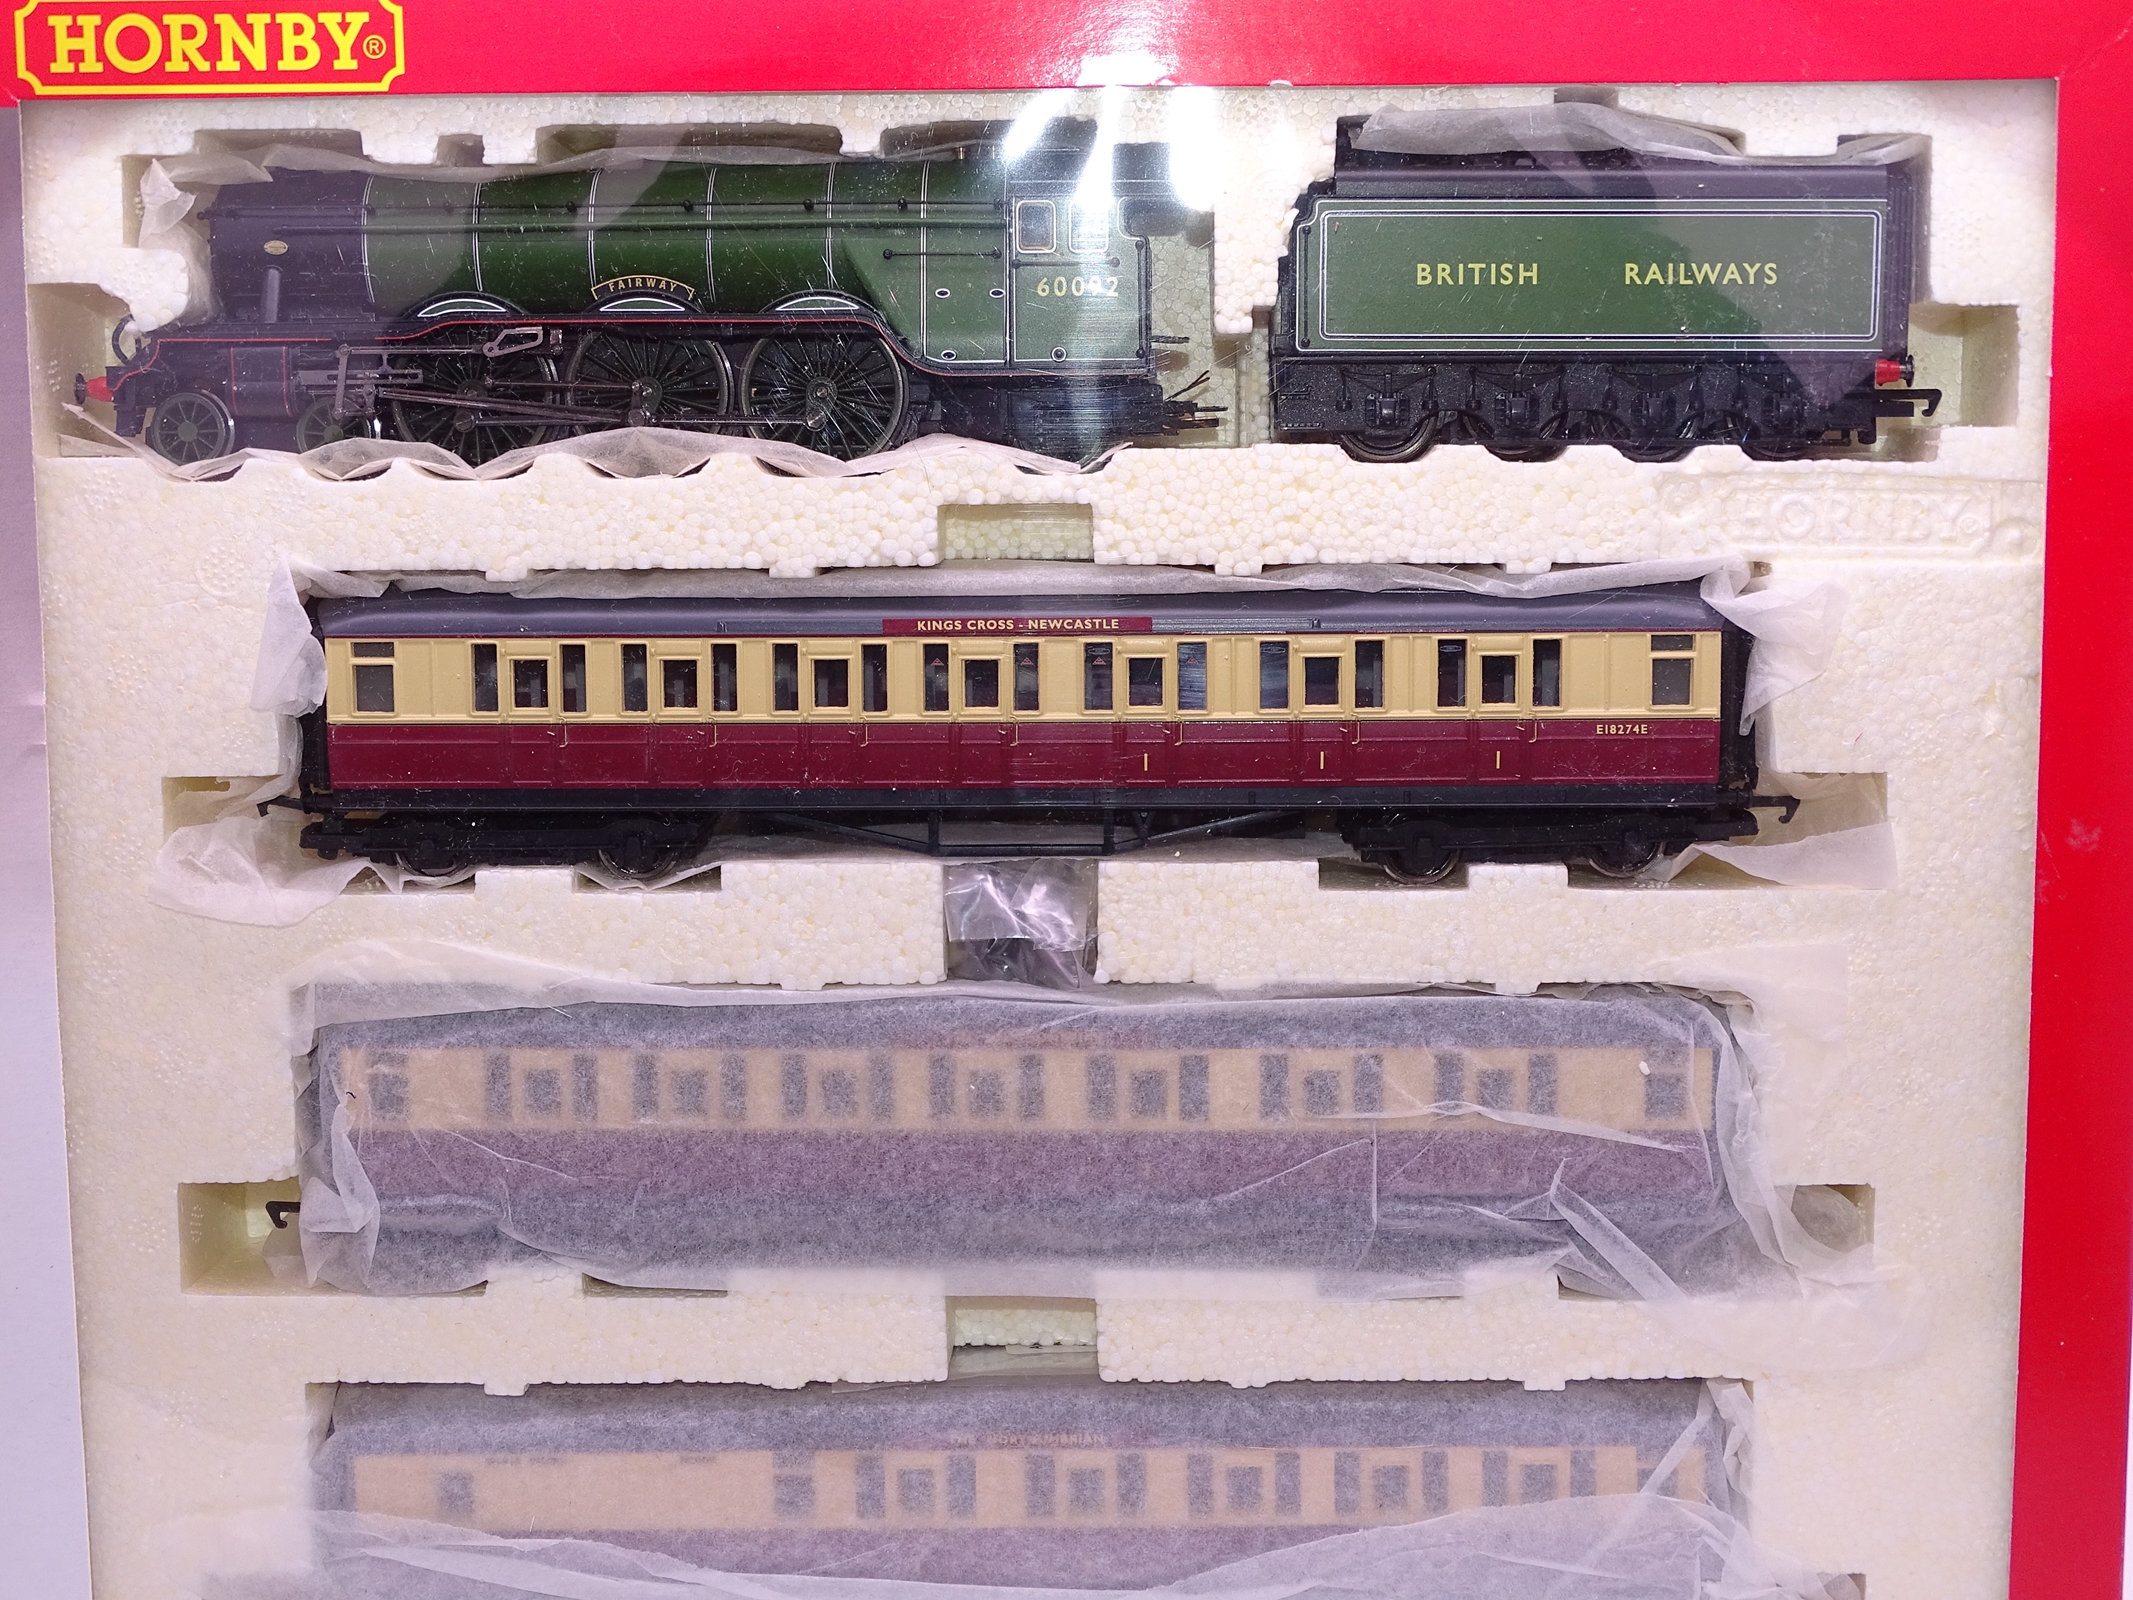 OO Gauge -A Hornby R2363M 'The Northumbrian' train pack including steam loco and 3 coaches - E,